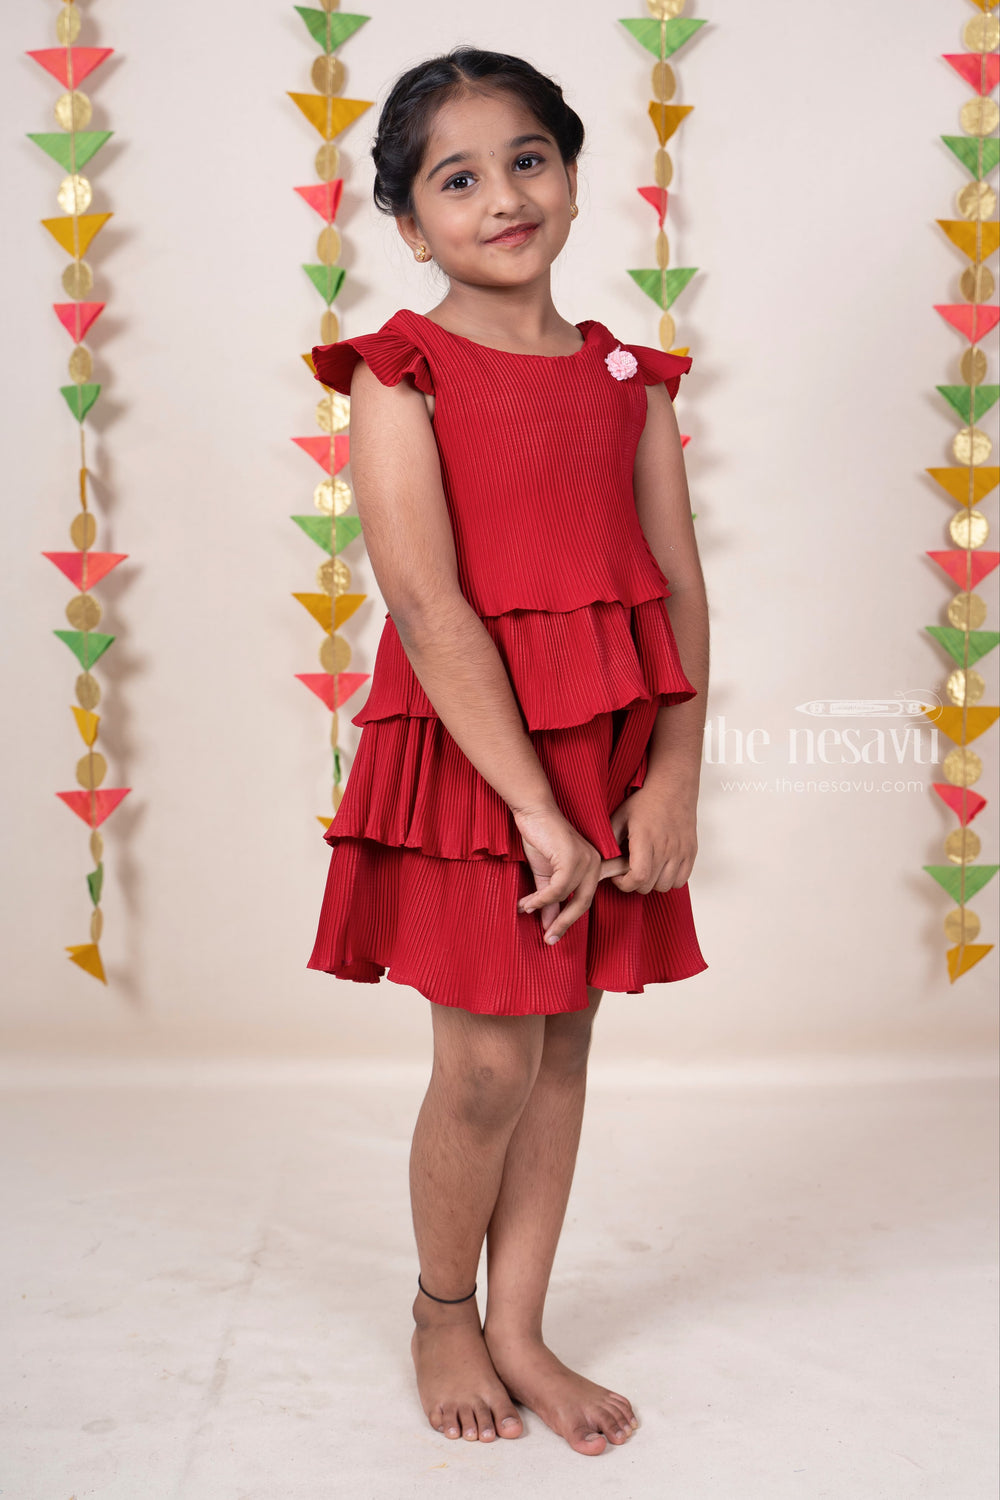 The Nesavu Frocks & Dresses Cherry Red Semi Ruffled Cotton Gown For Baby Girls With Floral Embellishments psr silks Nesavu